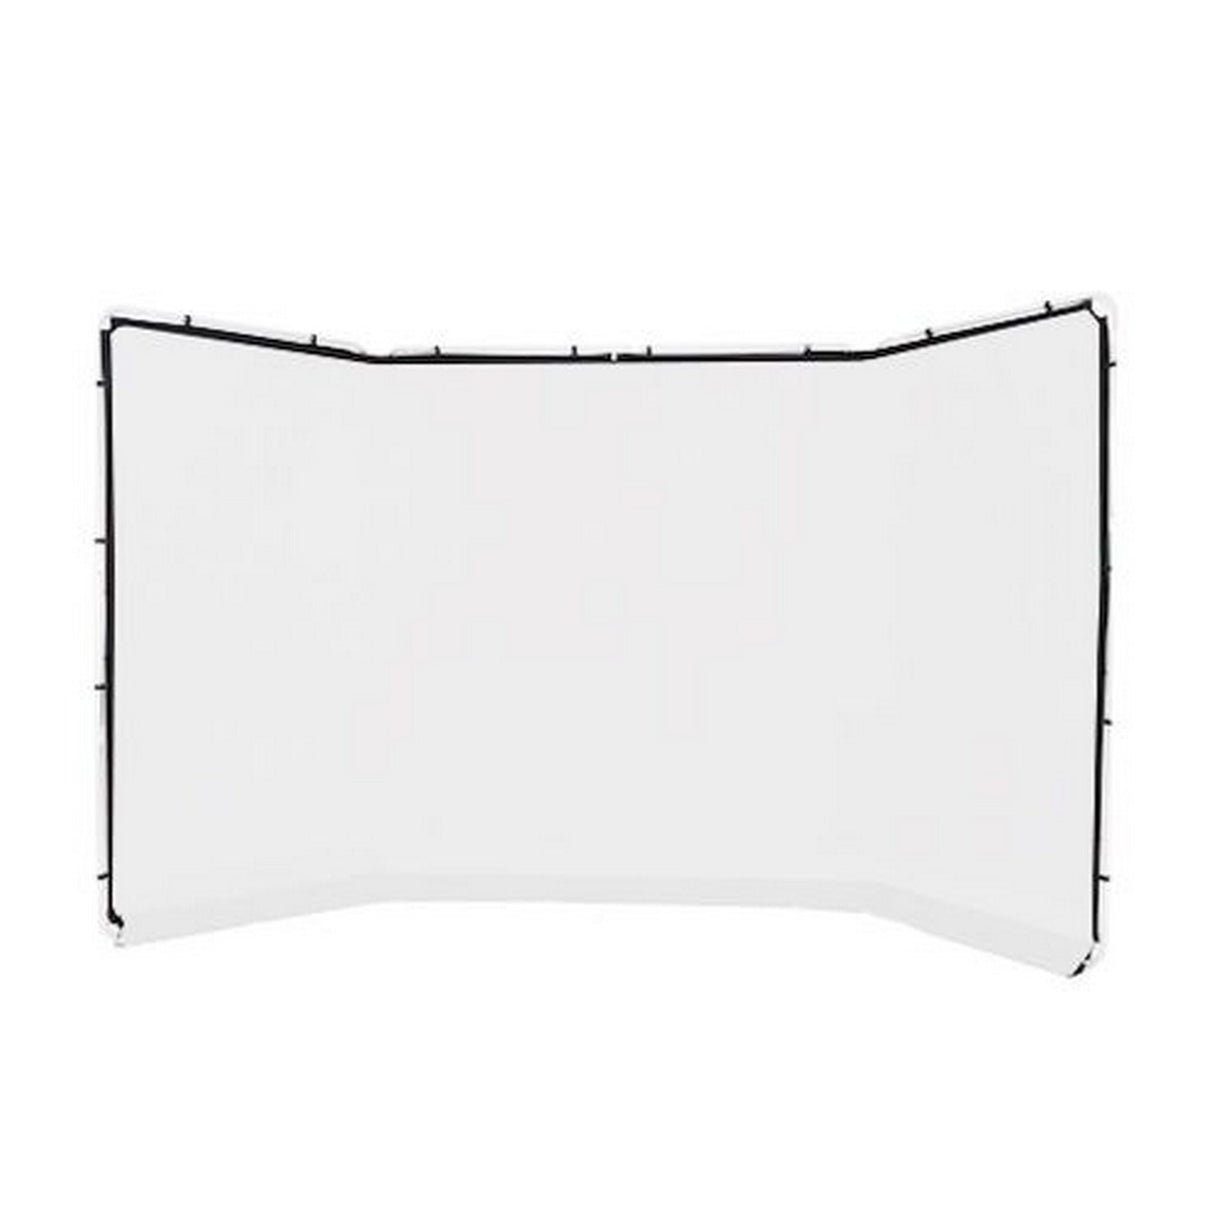 Lastolite LL LB7627 Panoramic Background Cover, 13 Foot, White